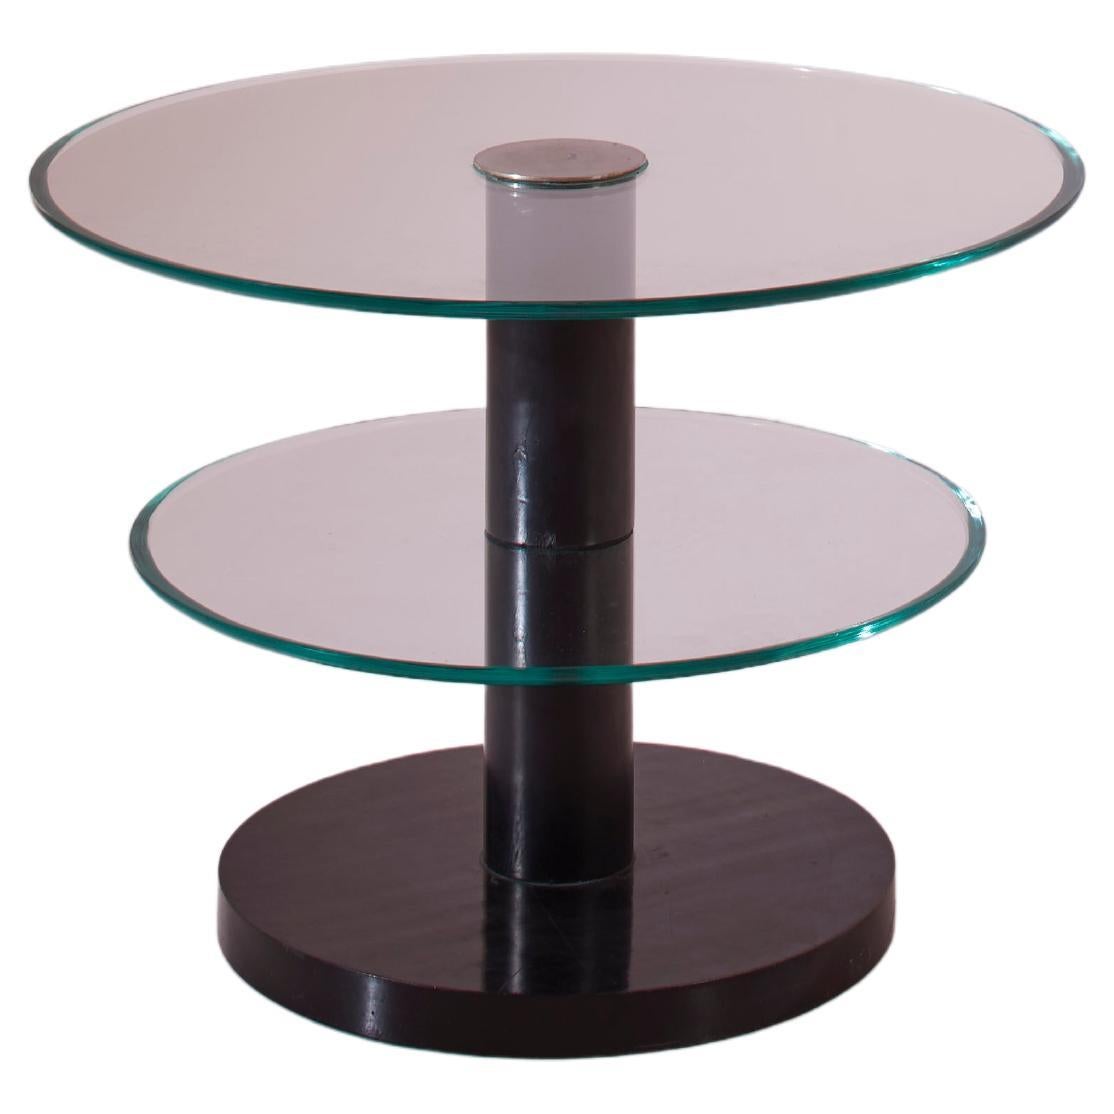 Gio Ponti wooden and glass occasional table, Italy, 1930s For Sale